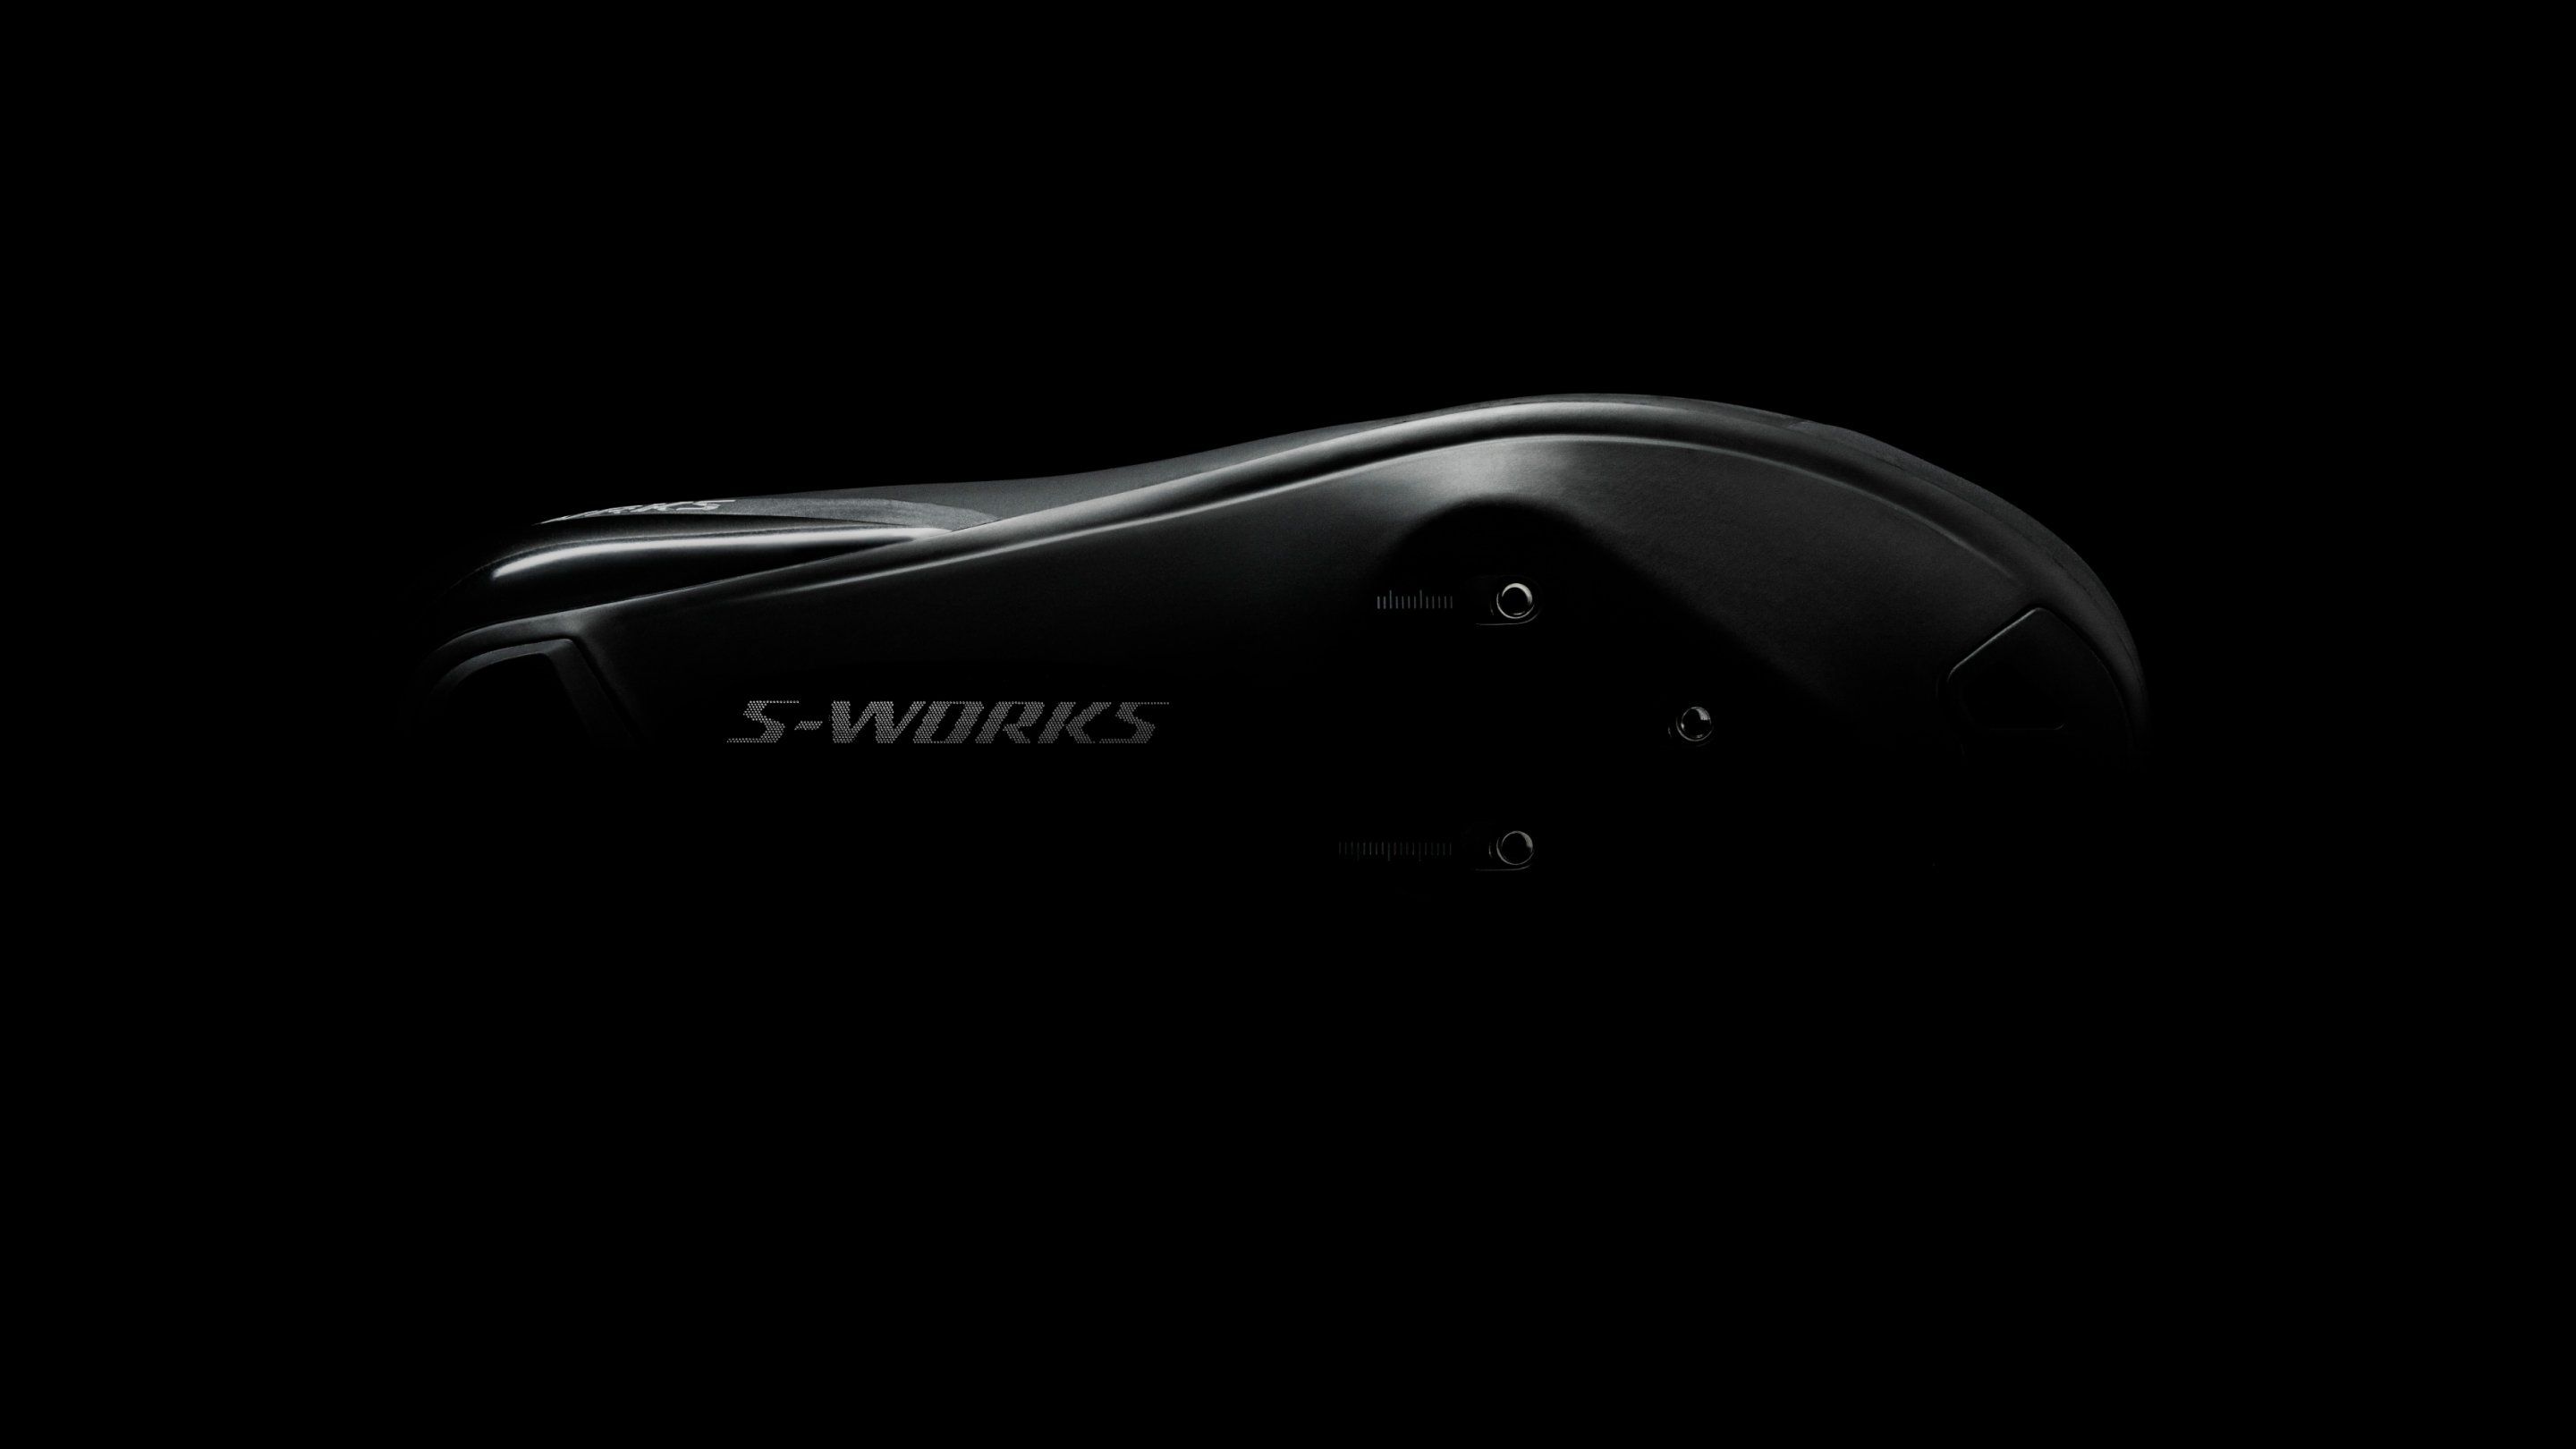 S-Works Torch Lace